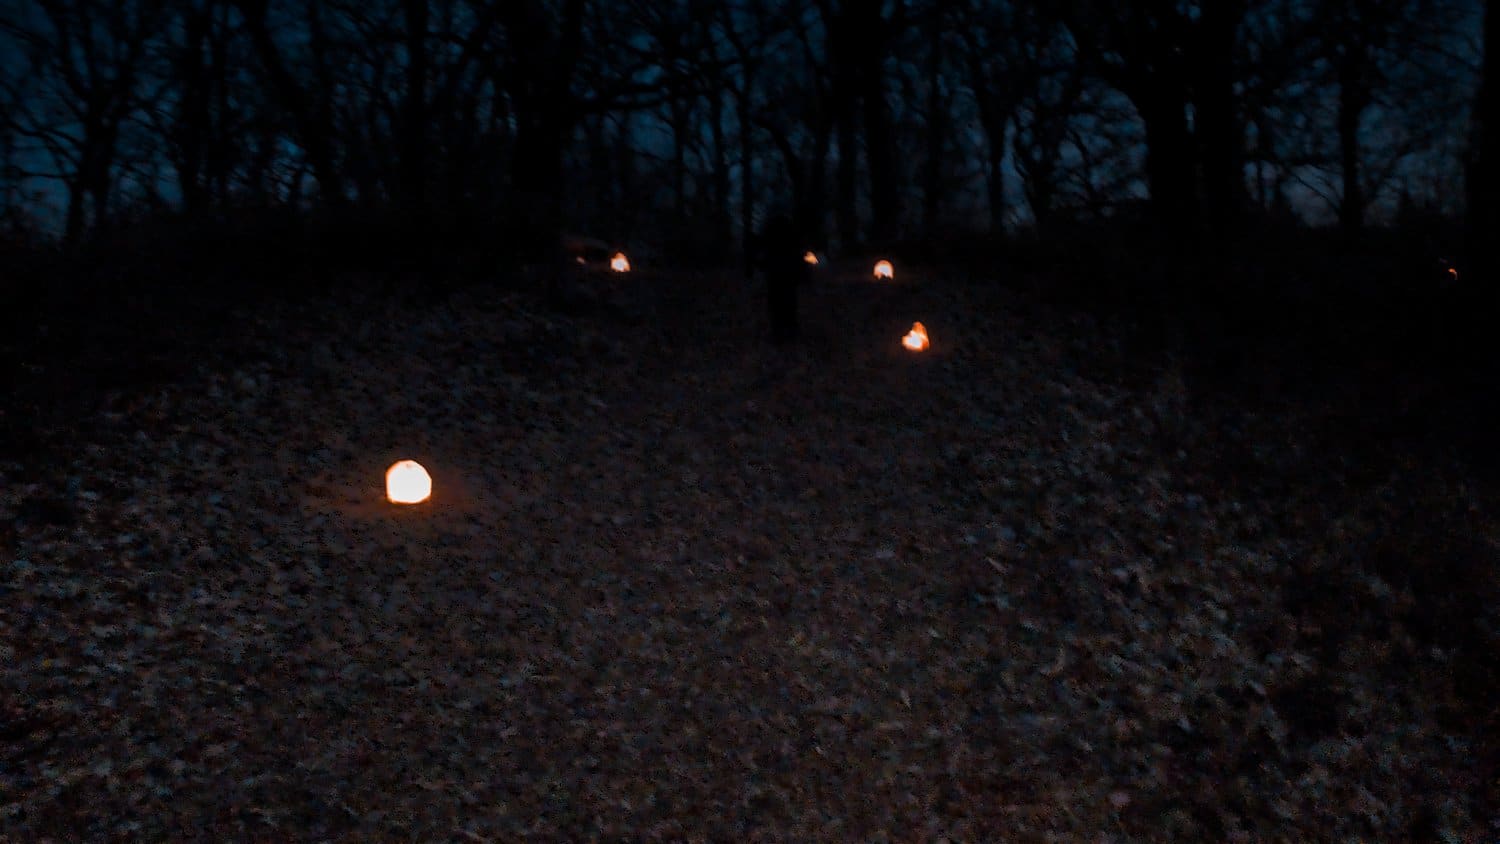 Luminarias lighting the path up the hill to the Nature Center.